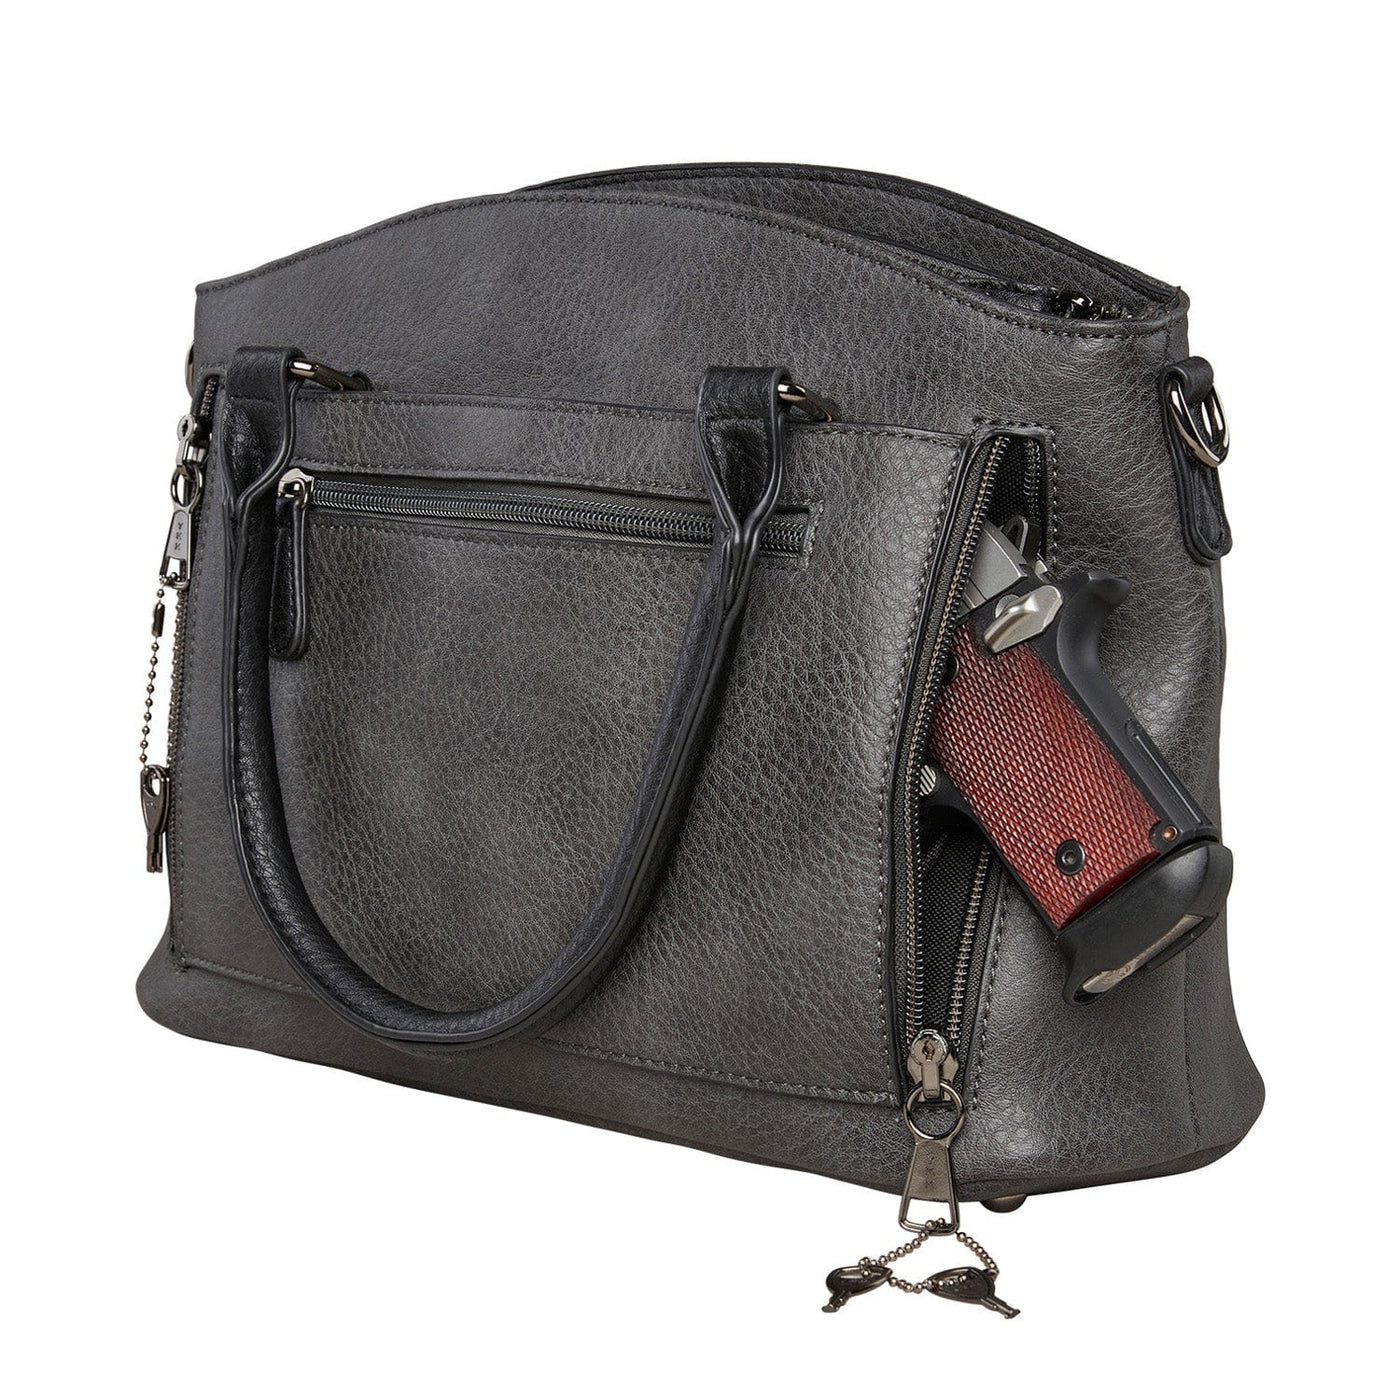 Concealed Carry Handbags - STS Ranchwear